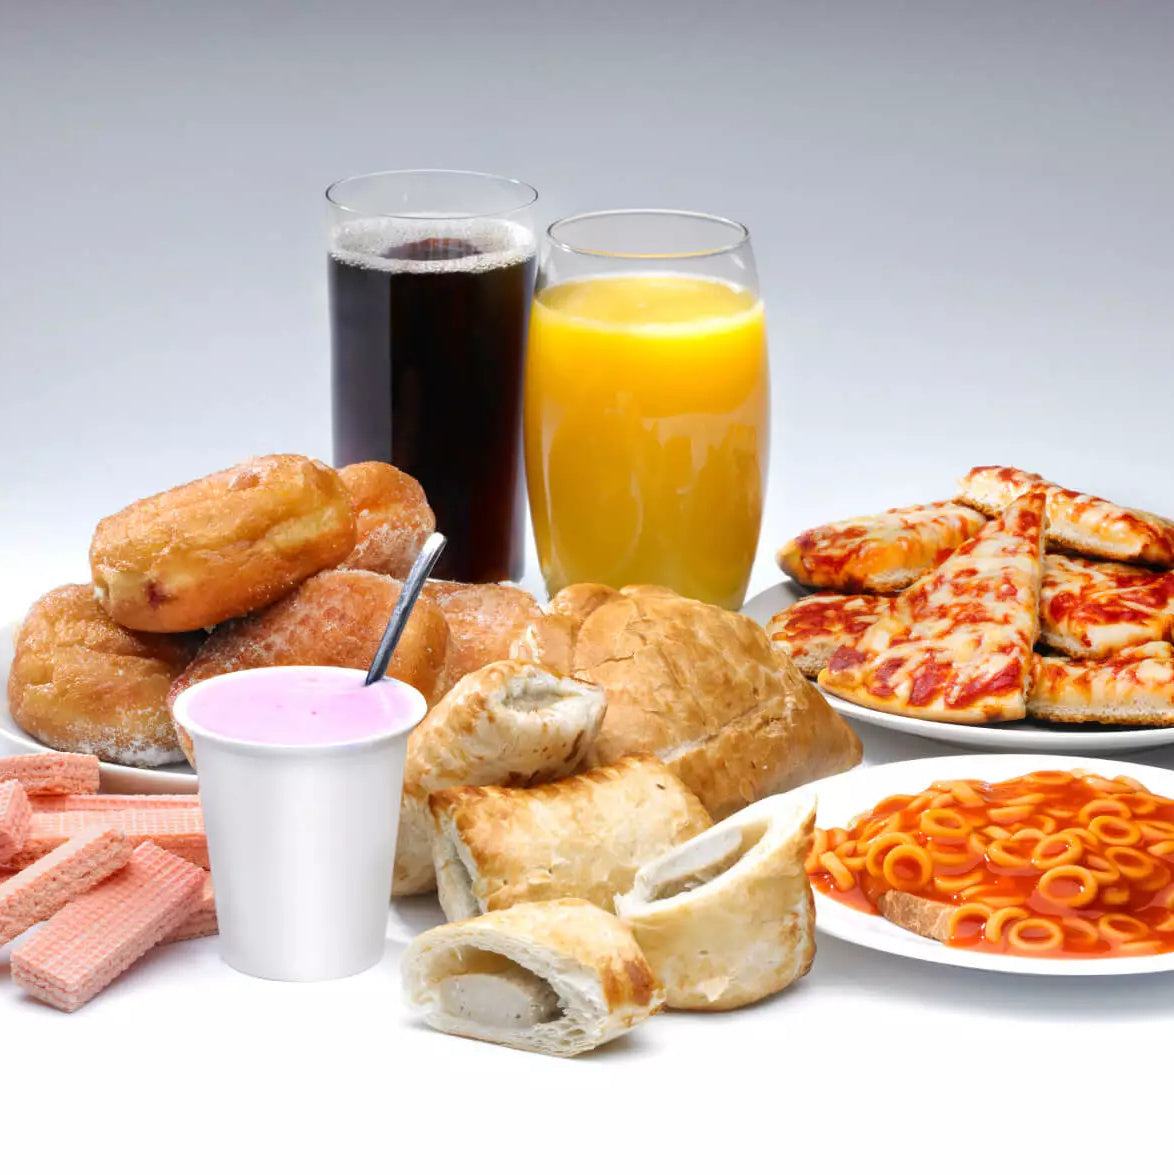 An example of the processed foods in the standard western diet